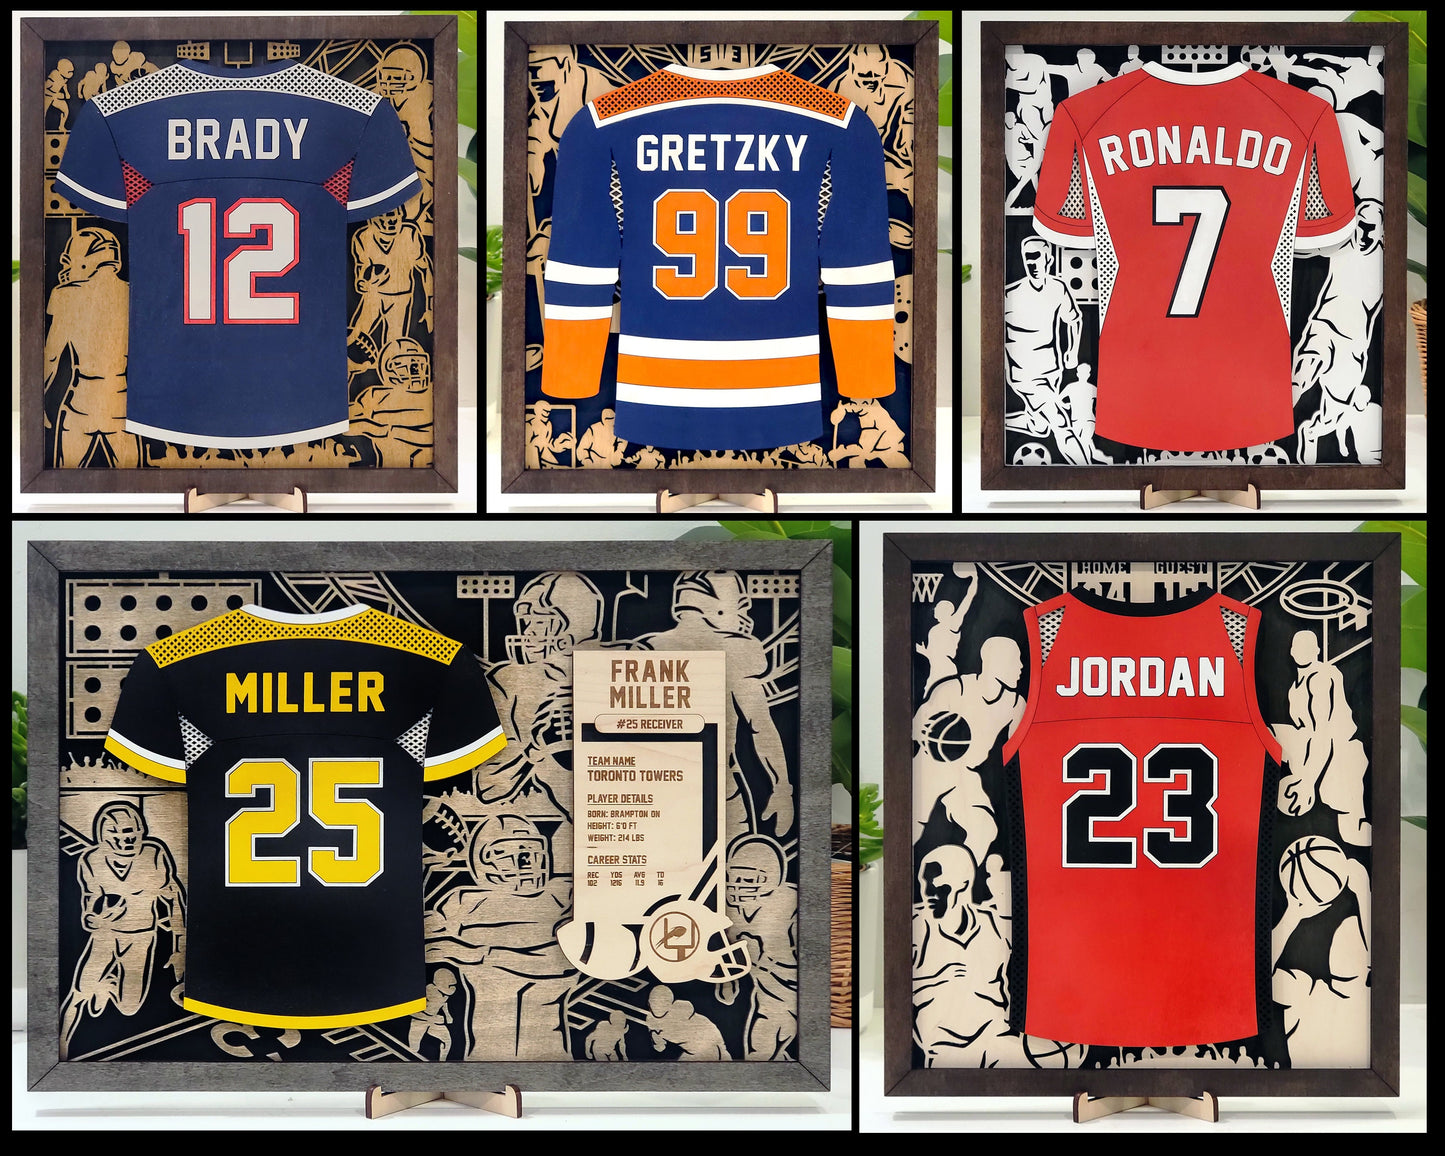 Stadium Series Jersey Mega Bundle - 5 Sports - 3 Variations for Each - Male, Female & Alternate Backgrounds - SVG Files -Sized for Glowforge